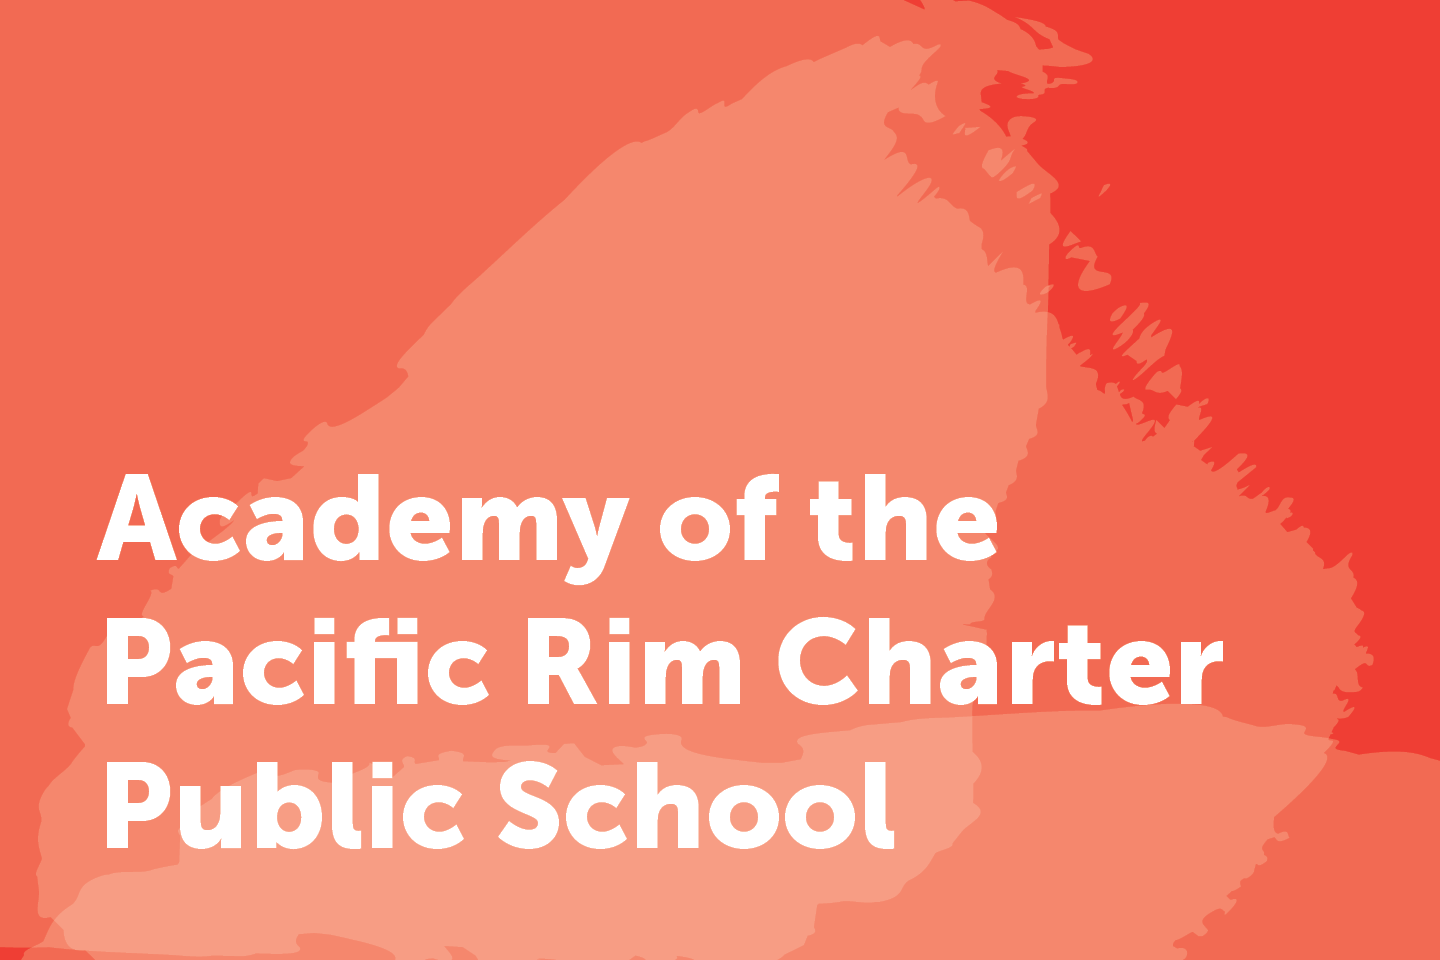 Academy of the Pacific Rim Charter Public School